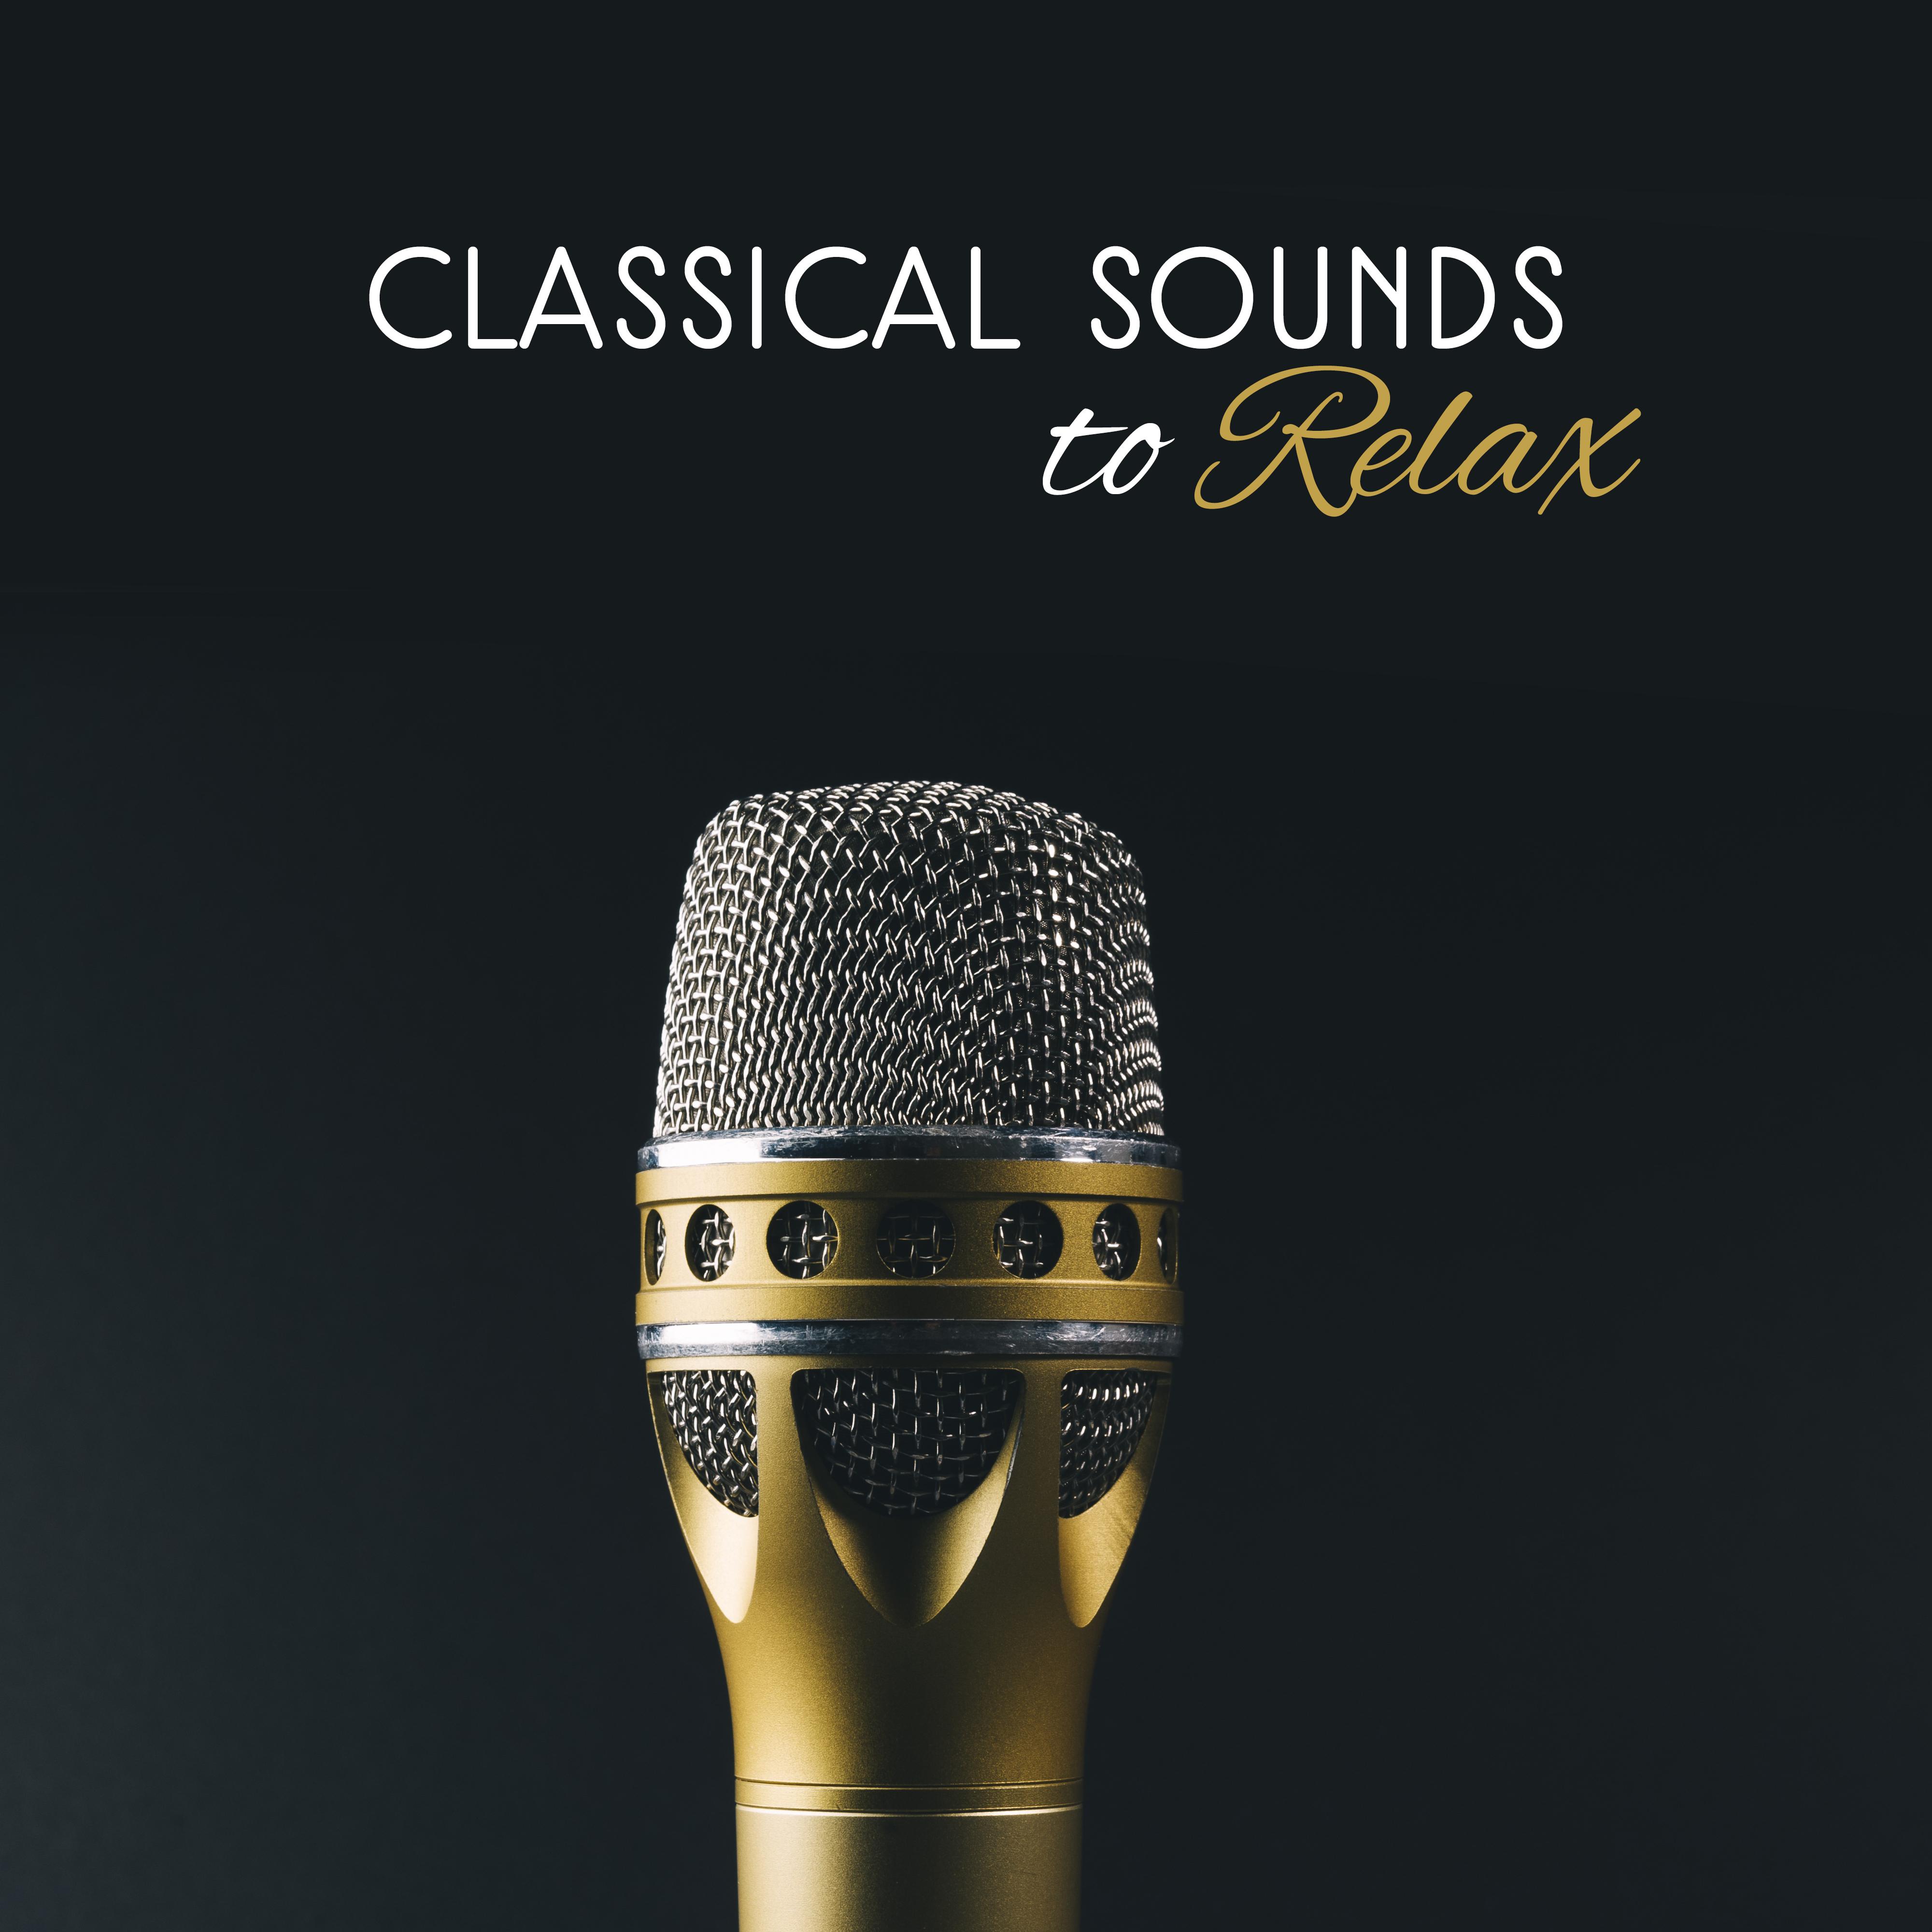 Classical Sounds to Relax  Easy Listening Classical Music, Soft Sounds to Rest